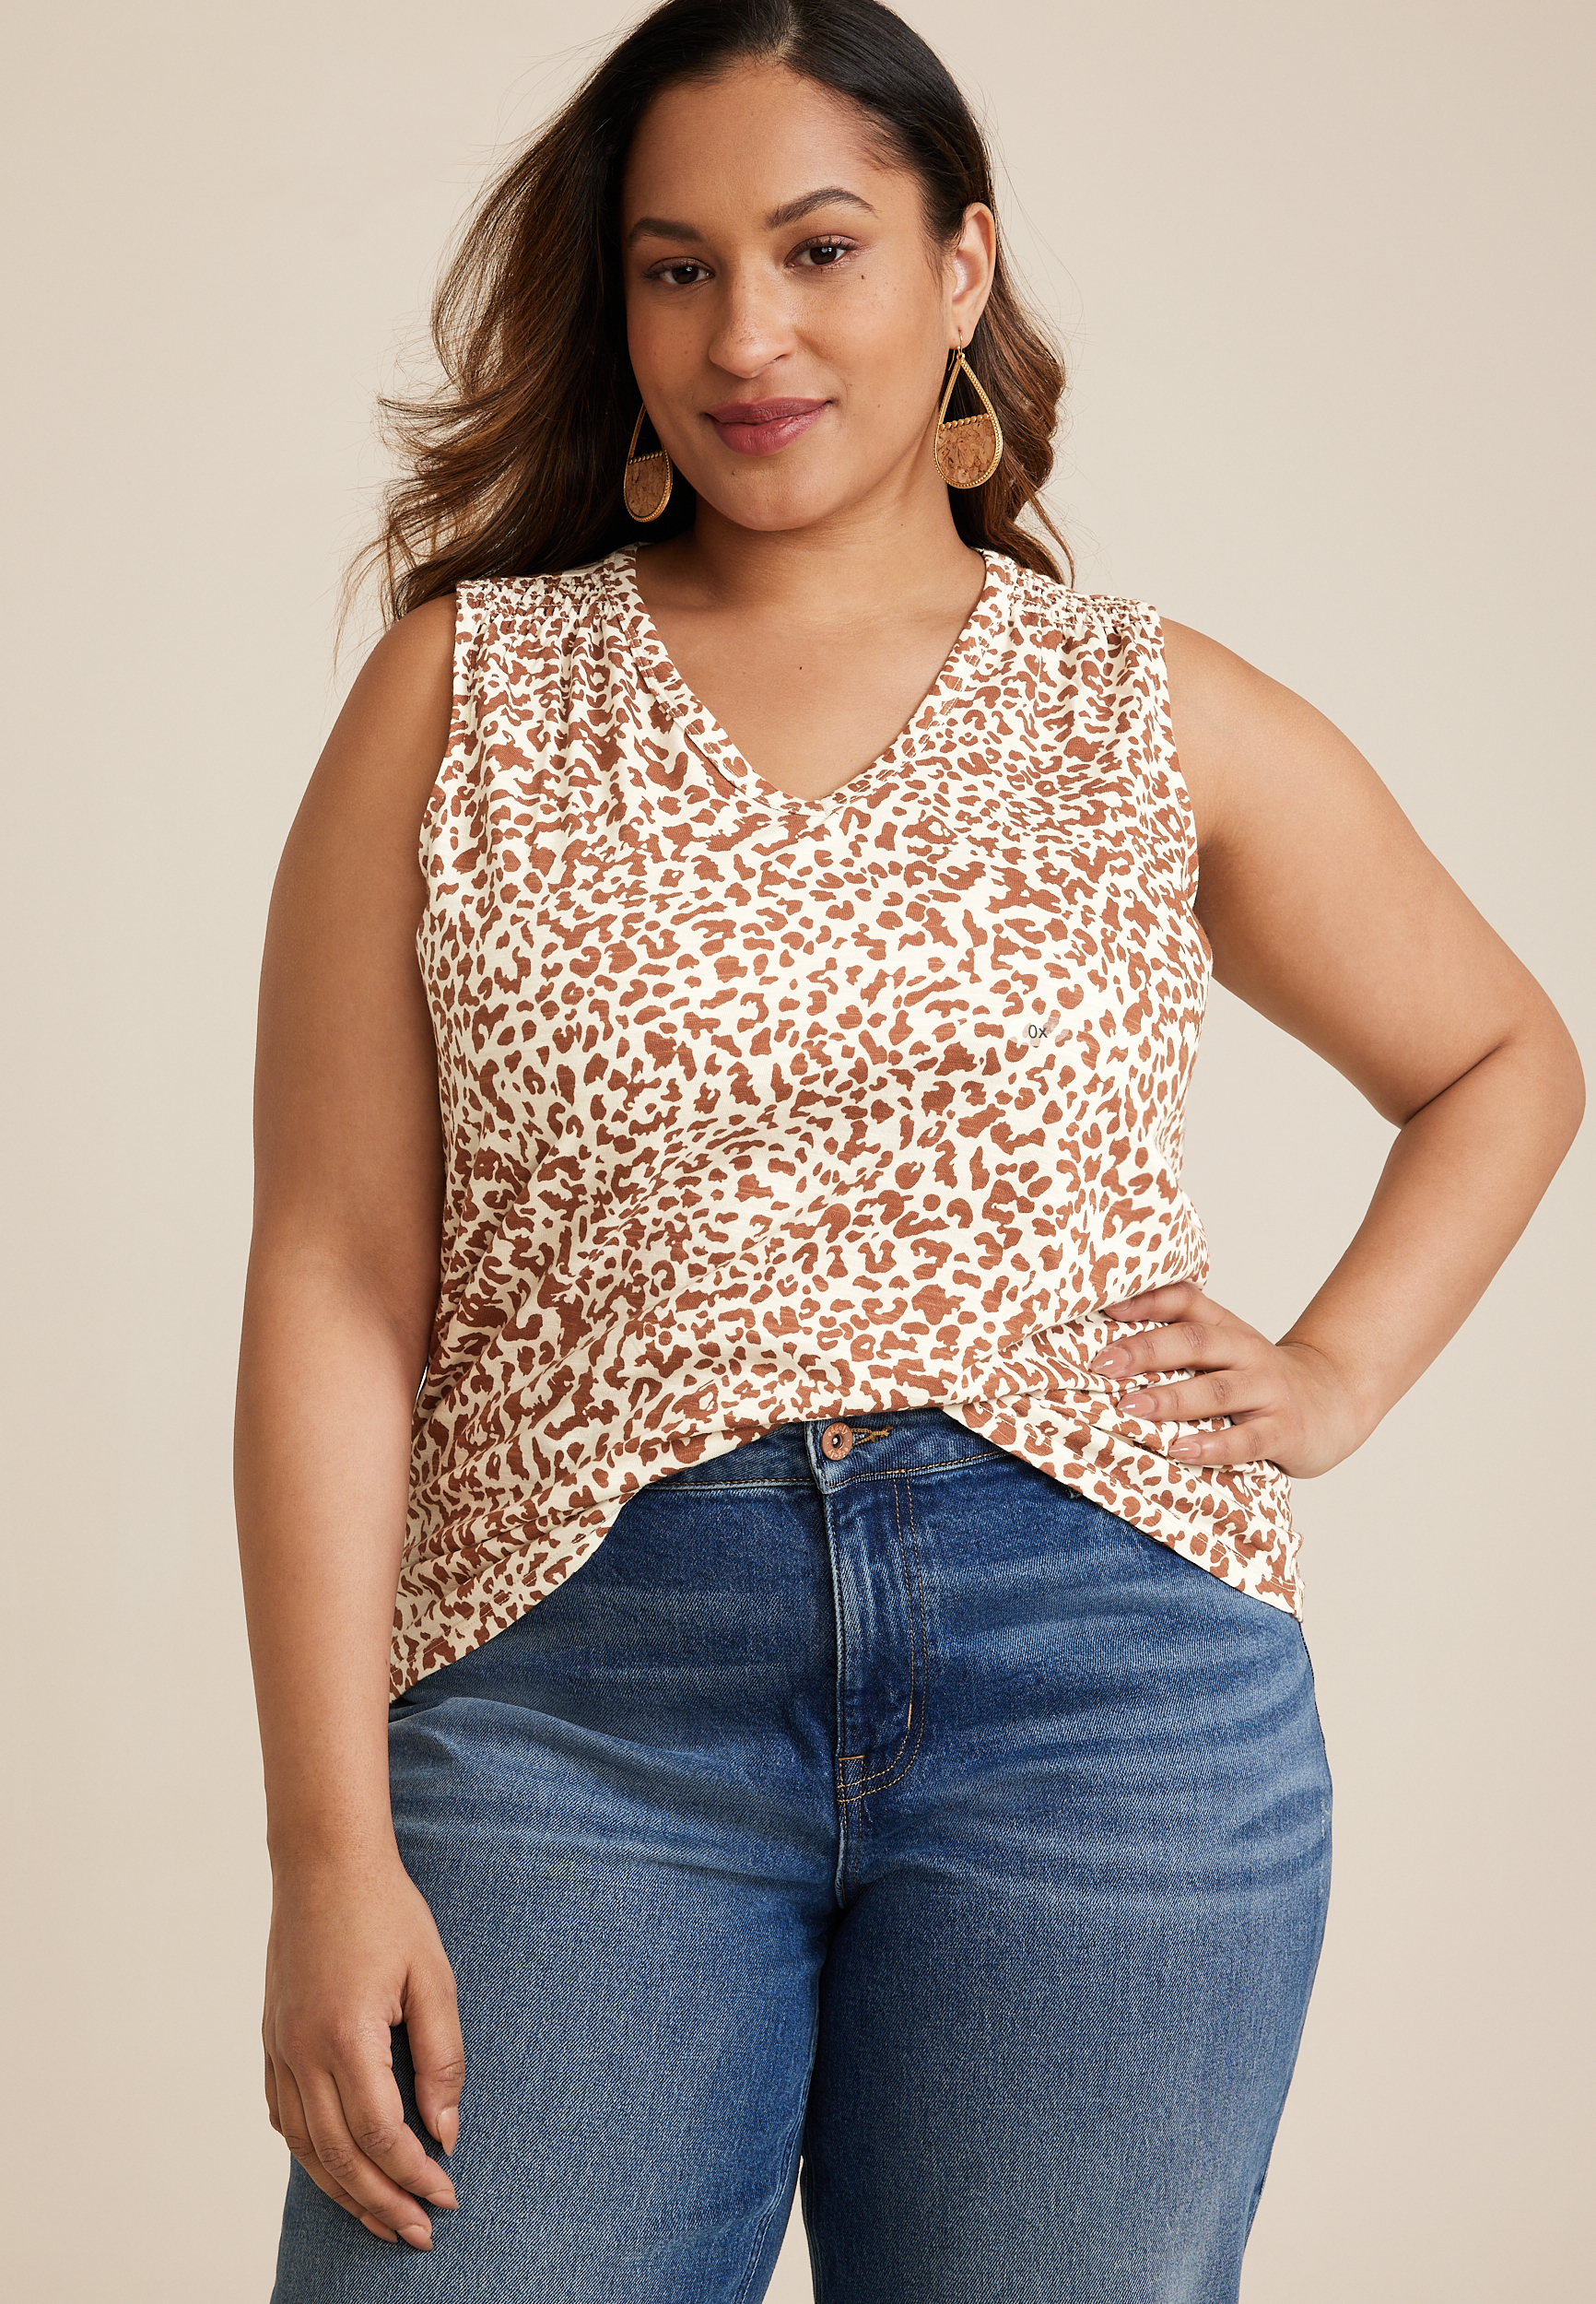  uhnmki Womens Plus Size Tops Over Size Printed Color